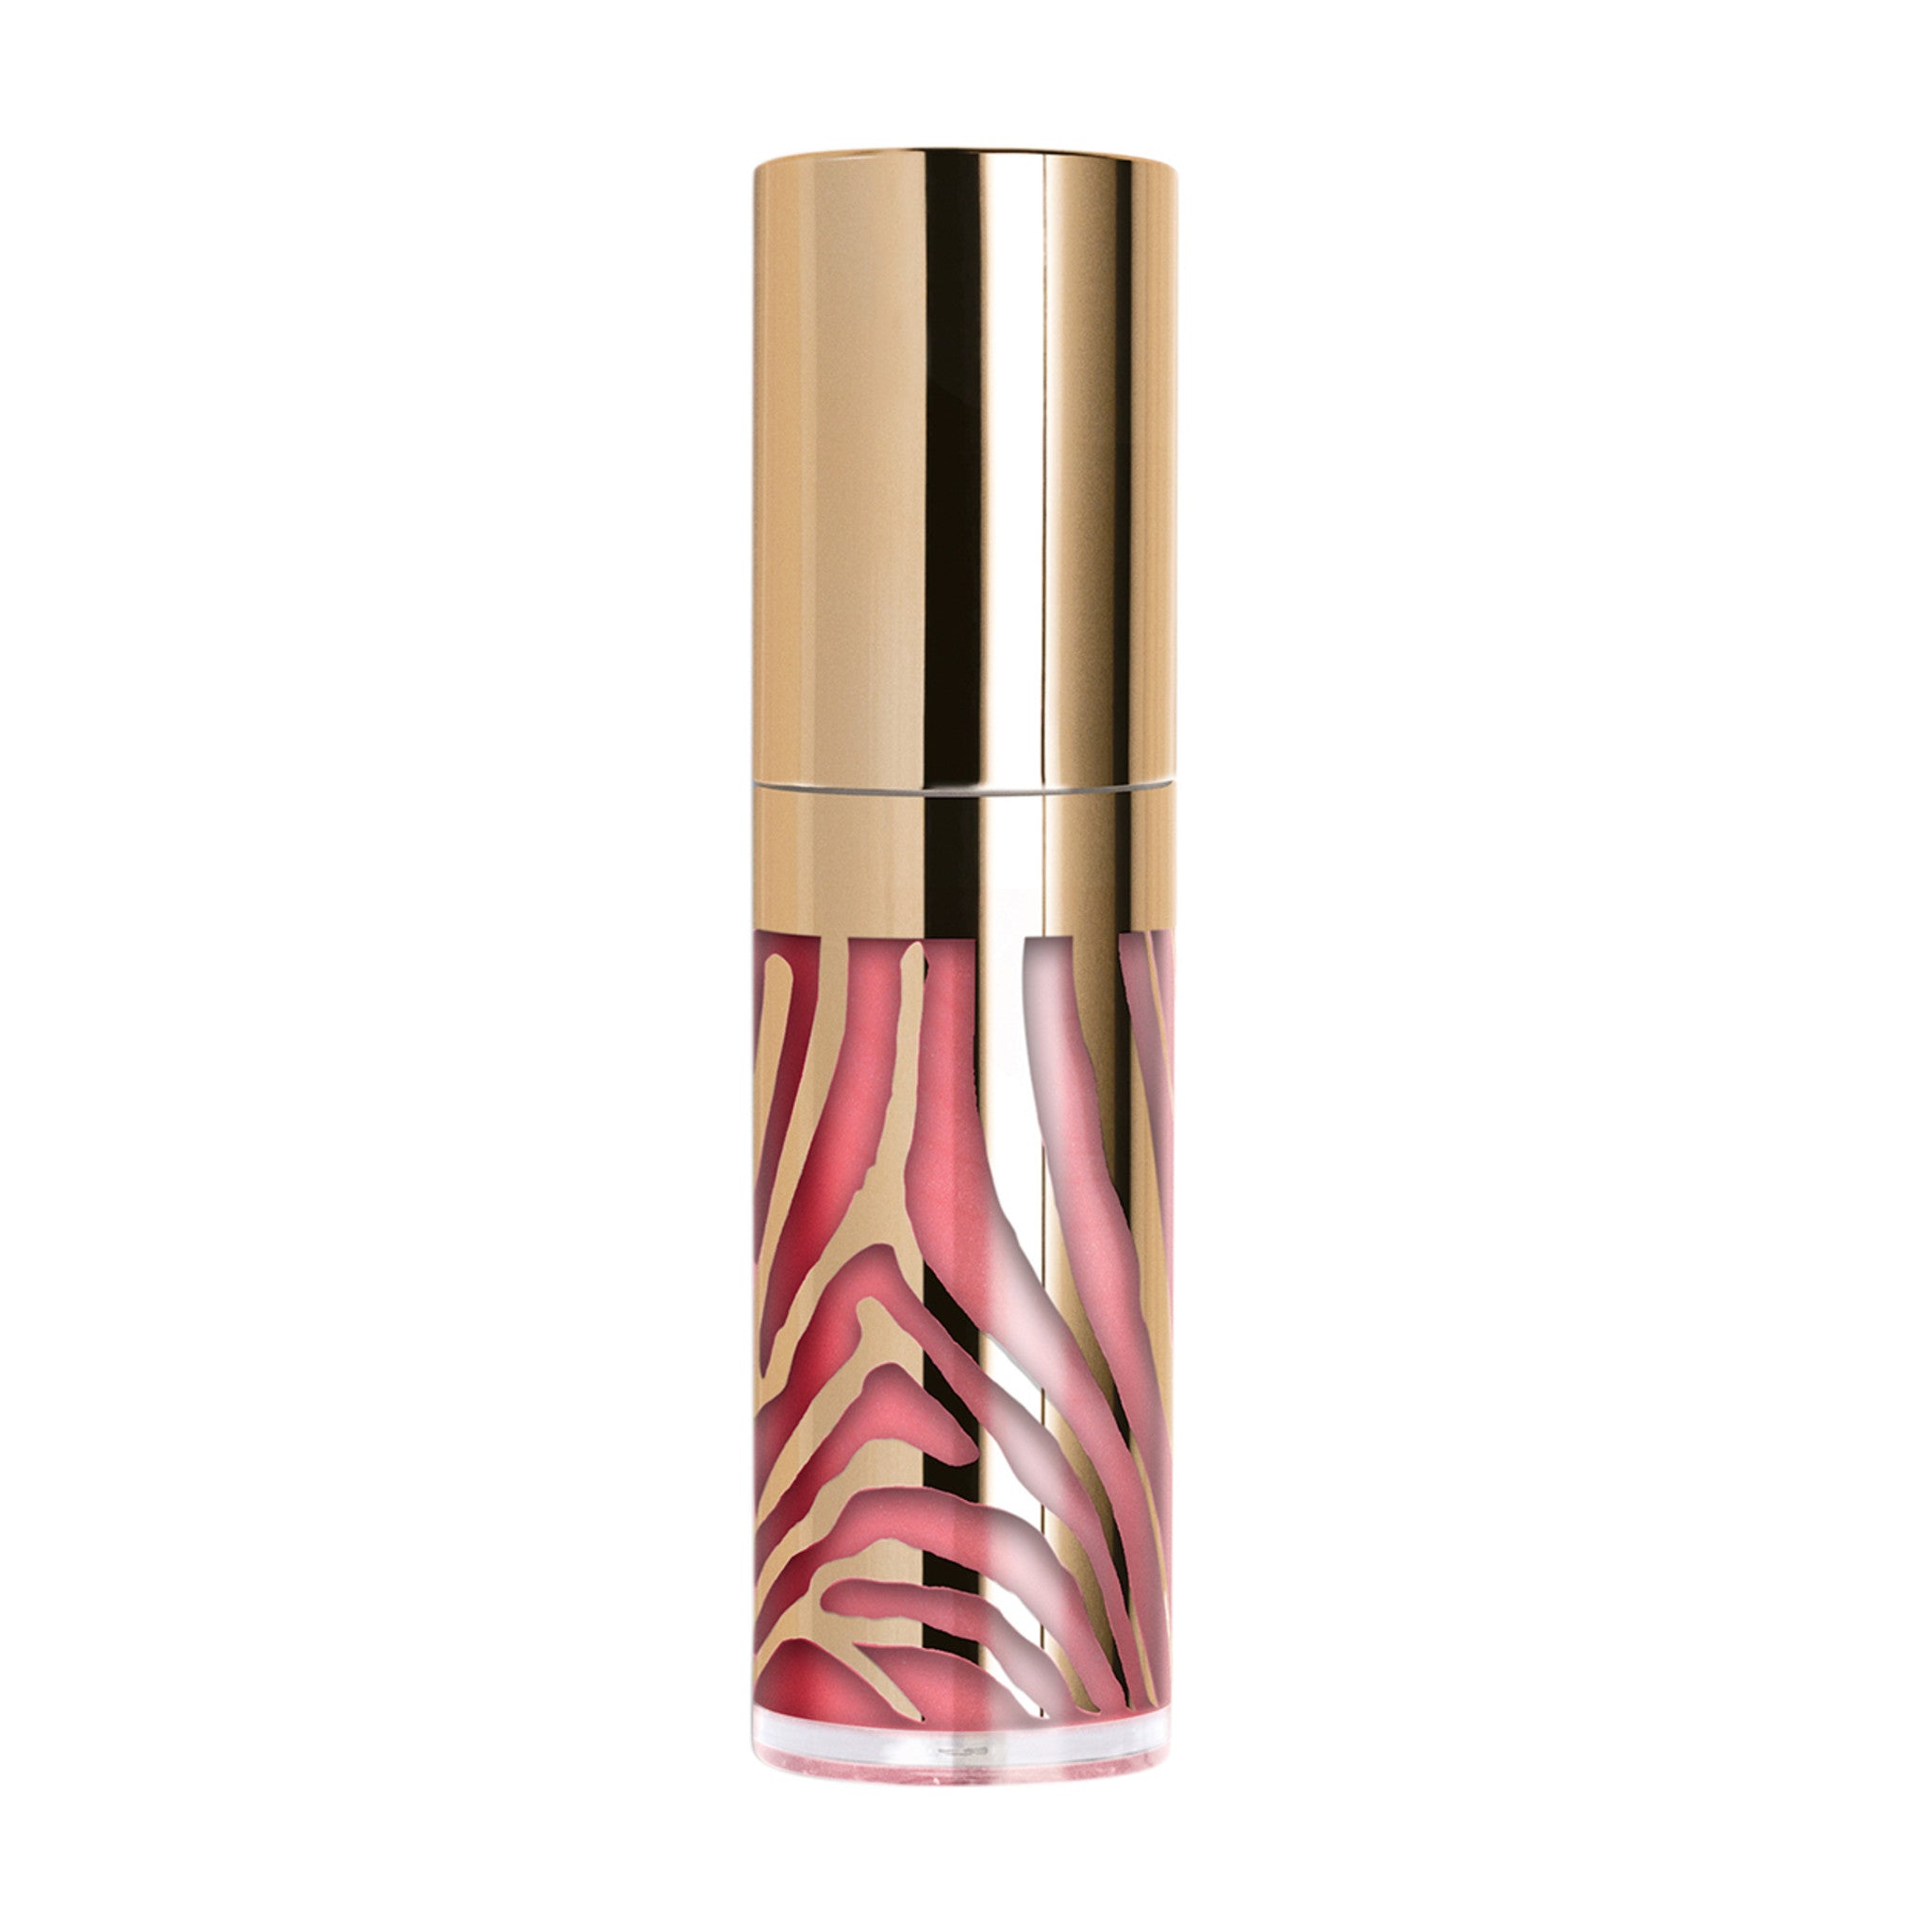 Sisley-Paris Le Phyto Gloss Color/Shade variant: 8 Milkyway - baby pink main image. This product is in the color pink